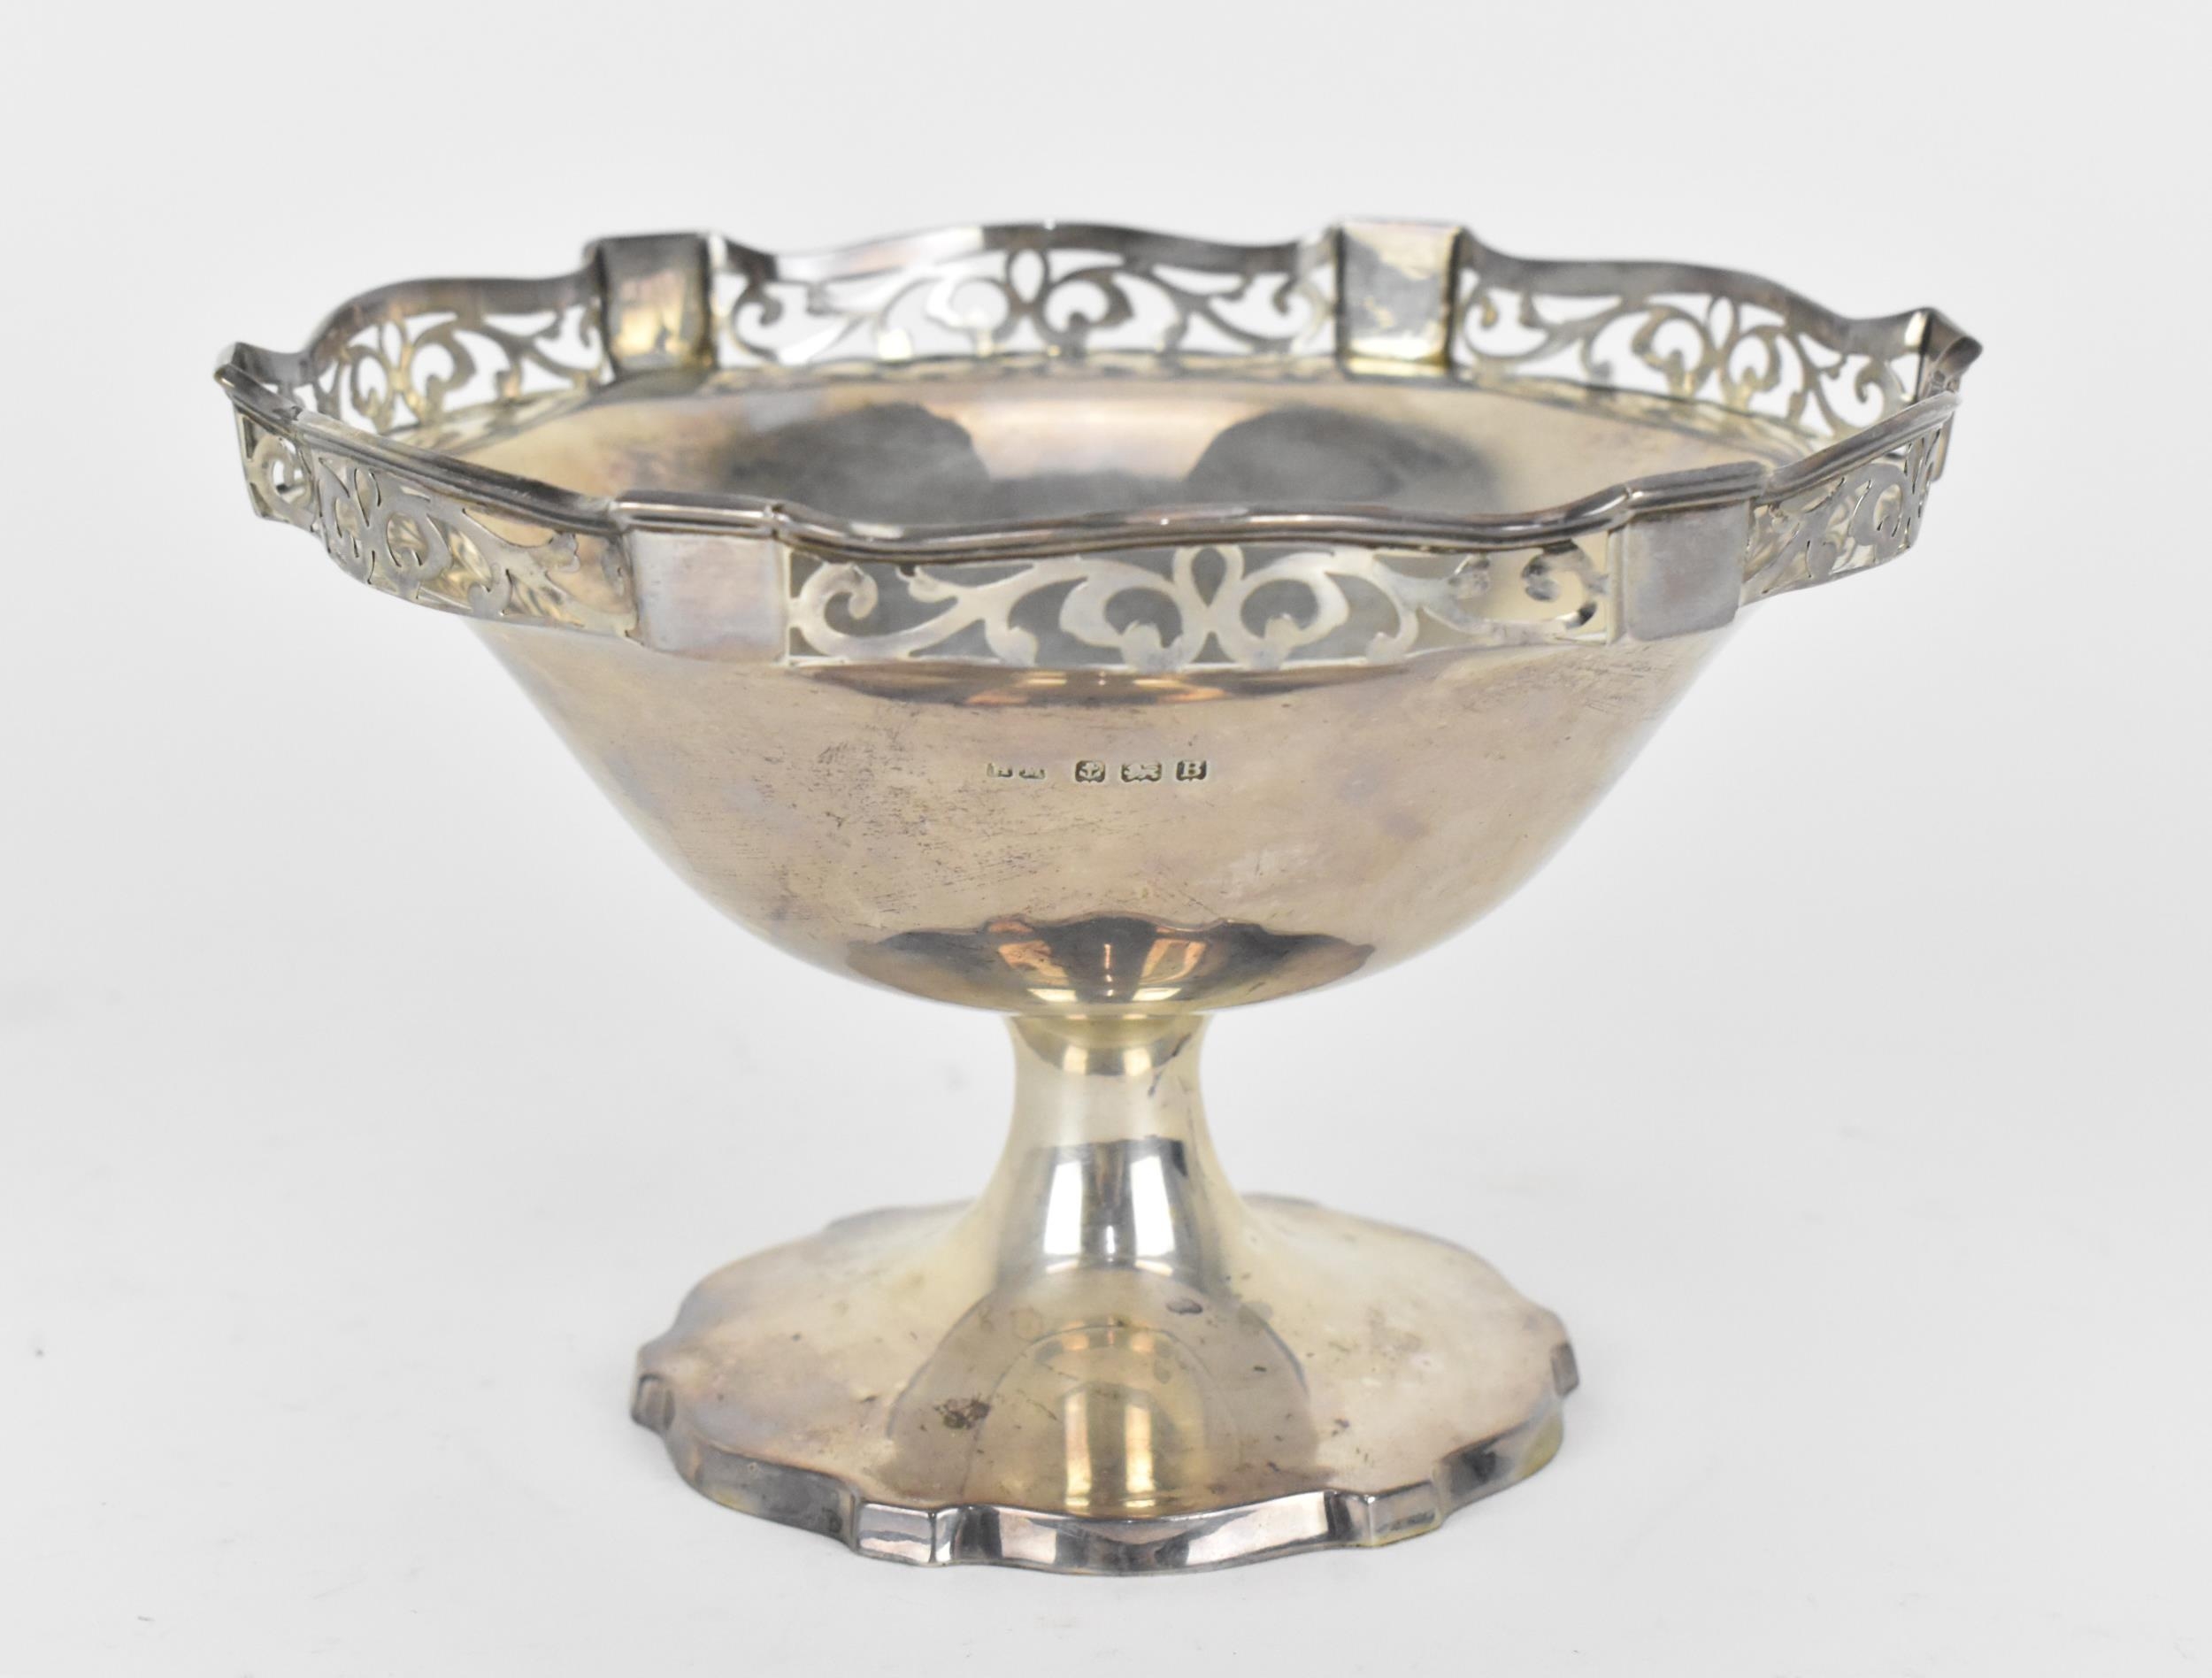 A George V silver bonbon dish on stand by Henry Matthews, Birmingham 1926, with pierced gallery